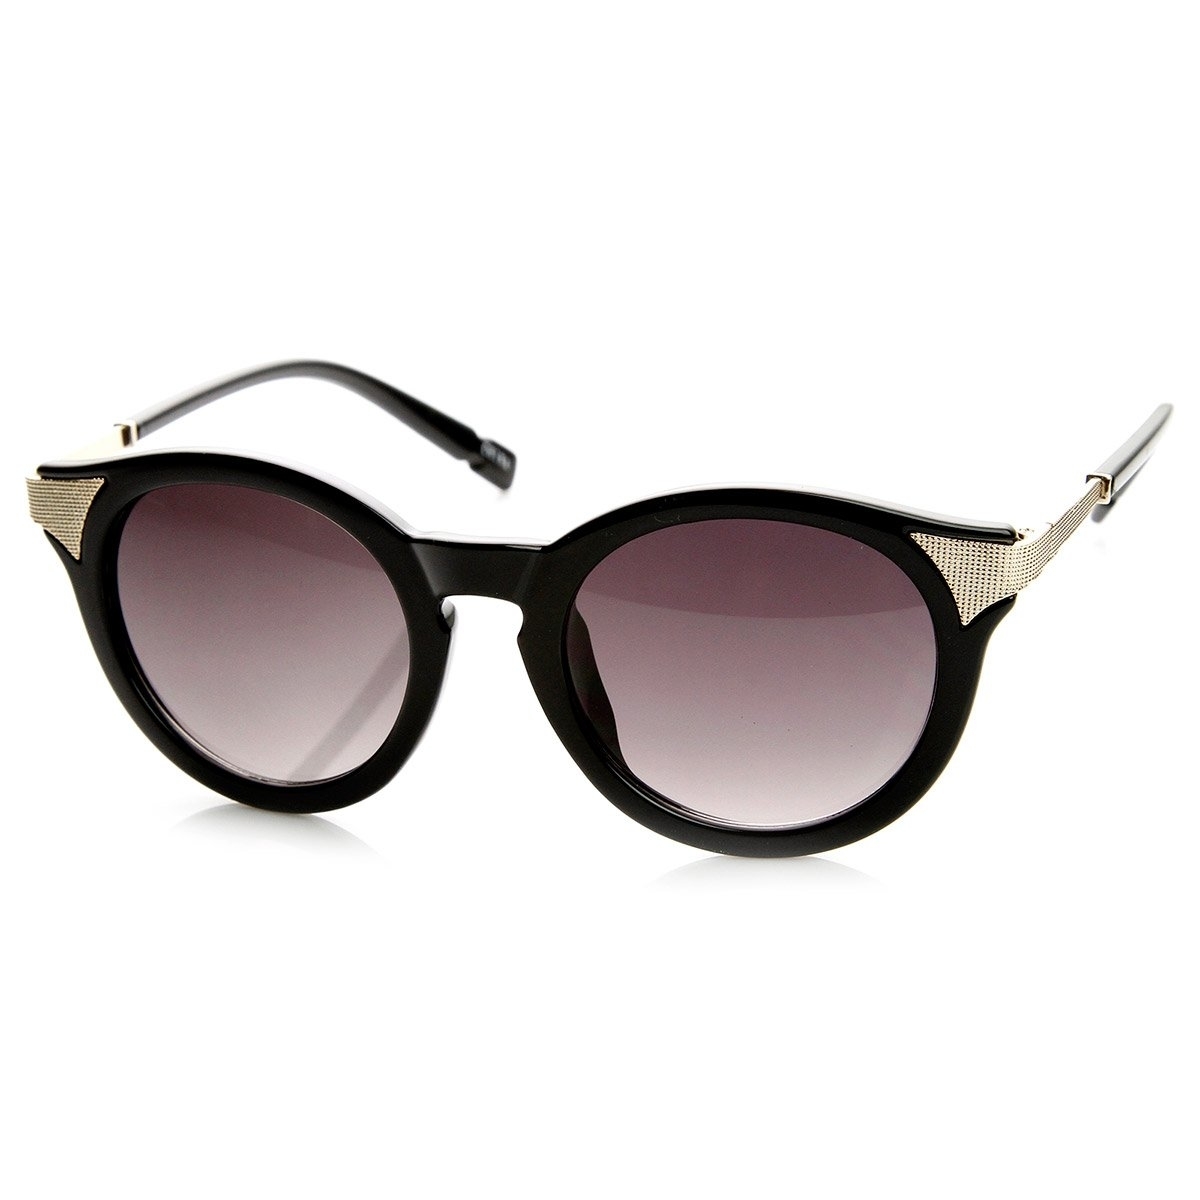 Mod Fashion Metal Temple Keyhole Round Horn Rimmed Sunglasses - Brown-Tortoise